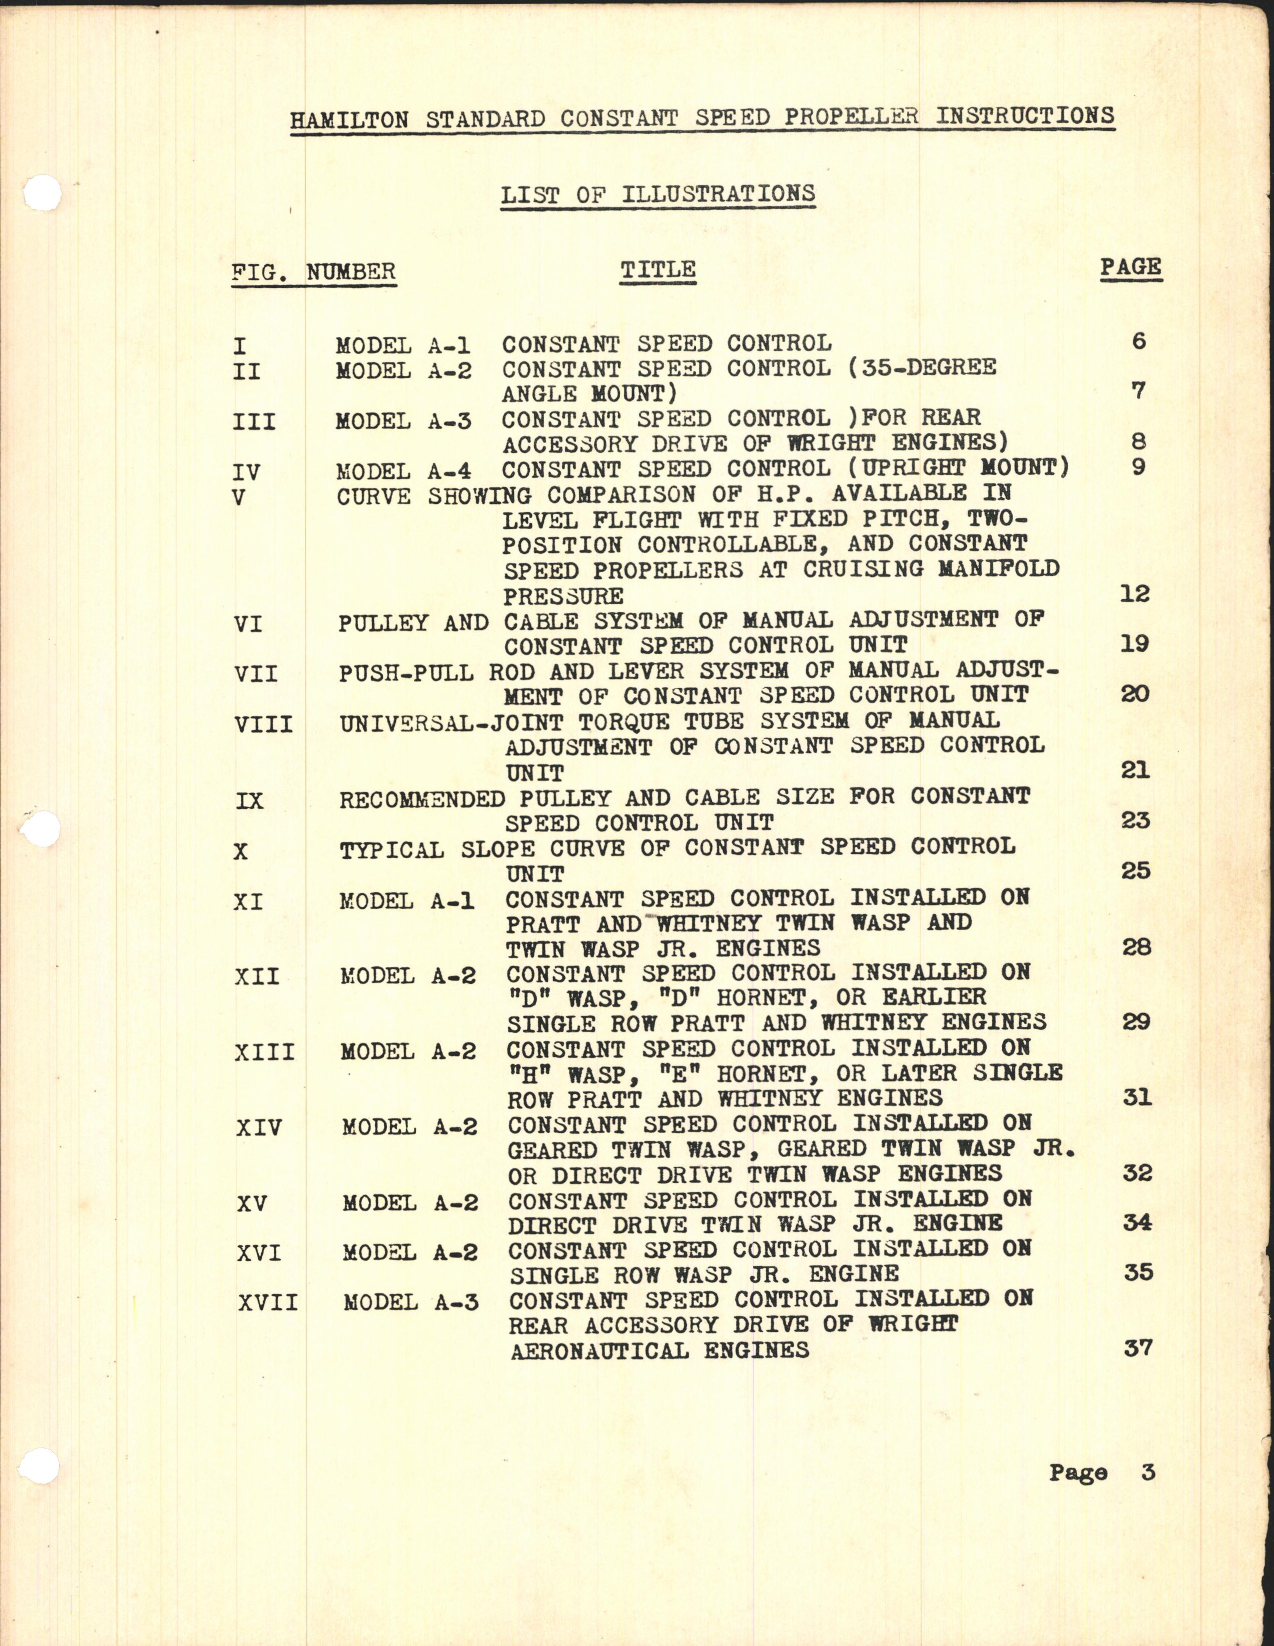 Sample page 5 from AirCorps Library document: Operation & Installation Instructions for Hamilton Standard Constant Speed Propellers